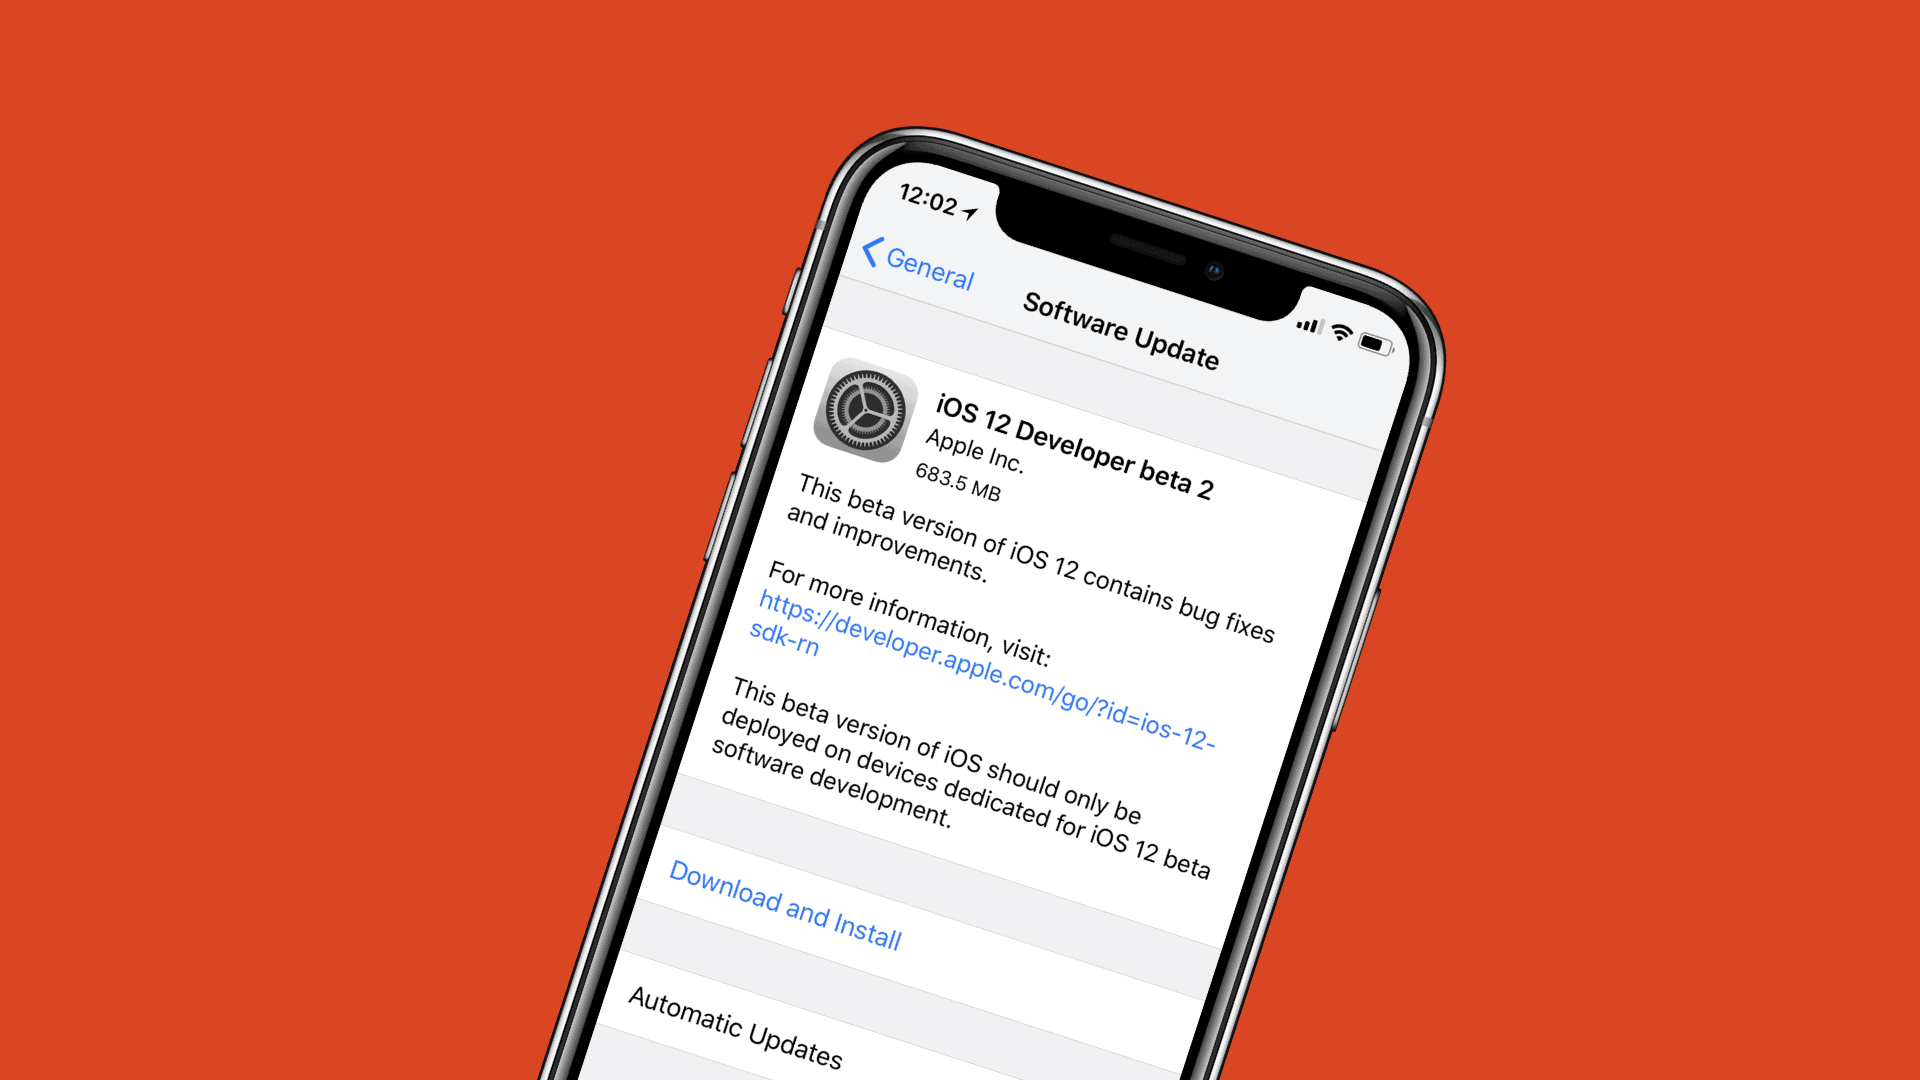 How to download iOS 12 Beta 2